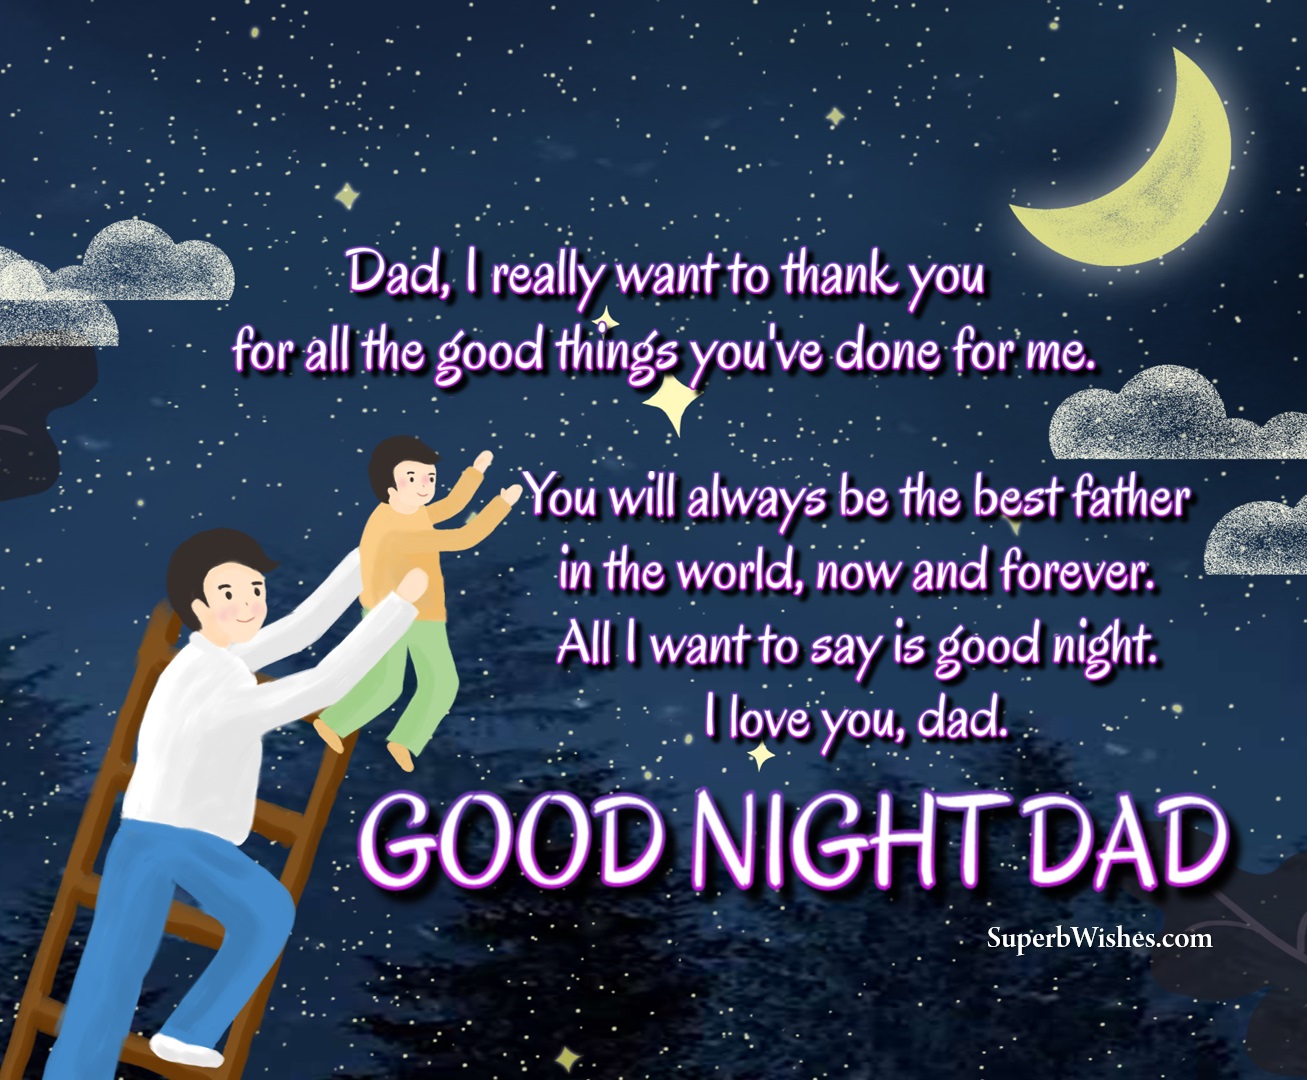 Good Night Message To Your Dad Image | SuperbWishes.com